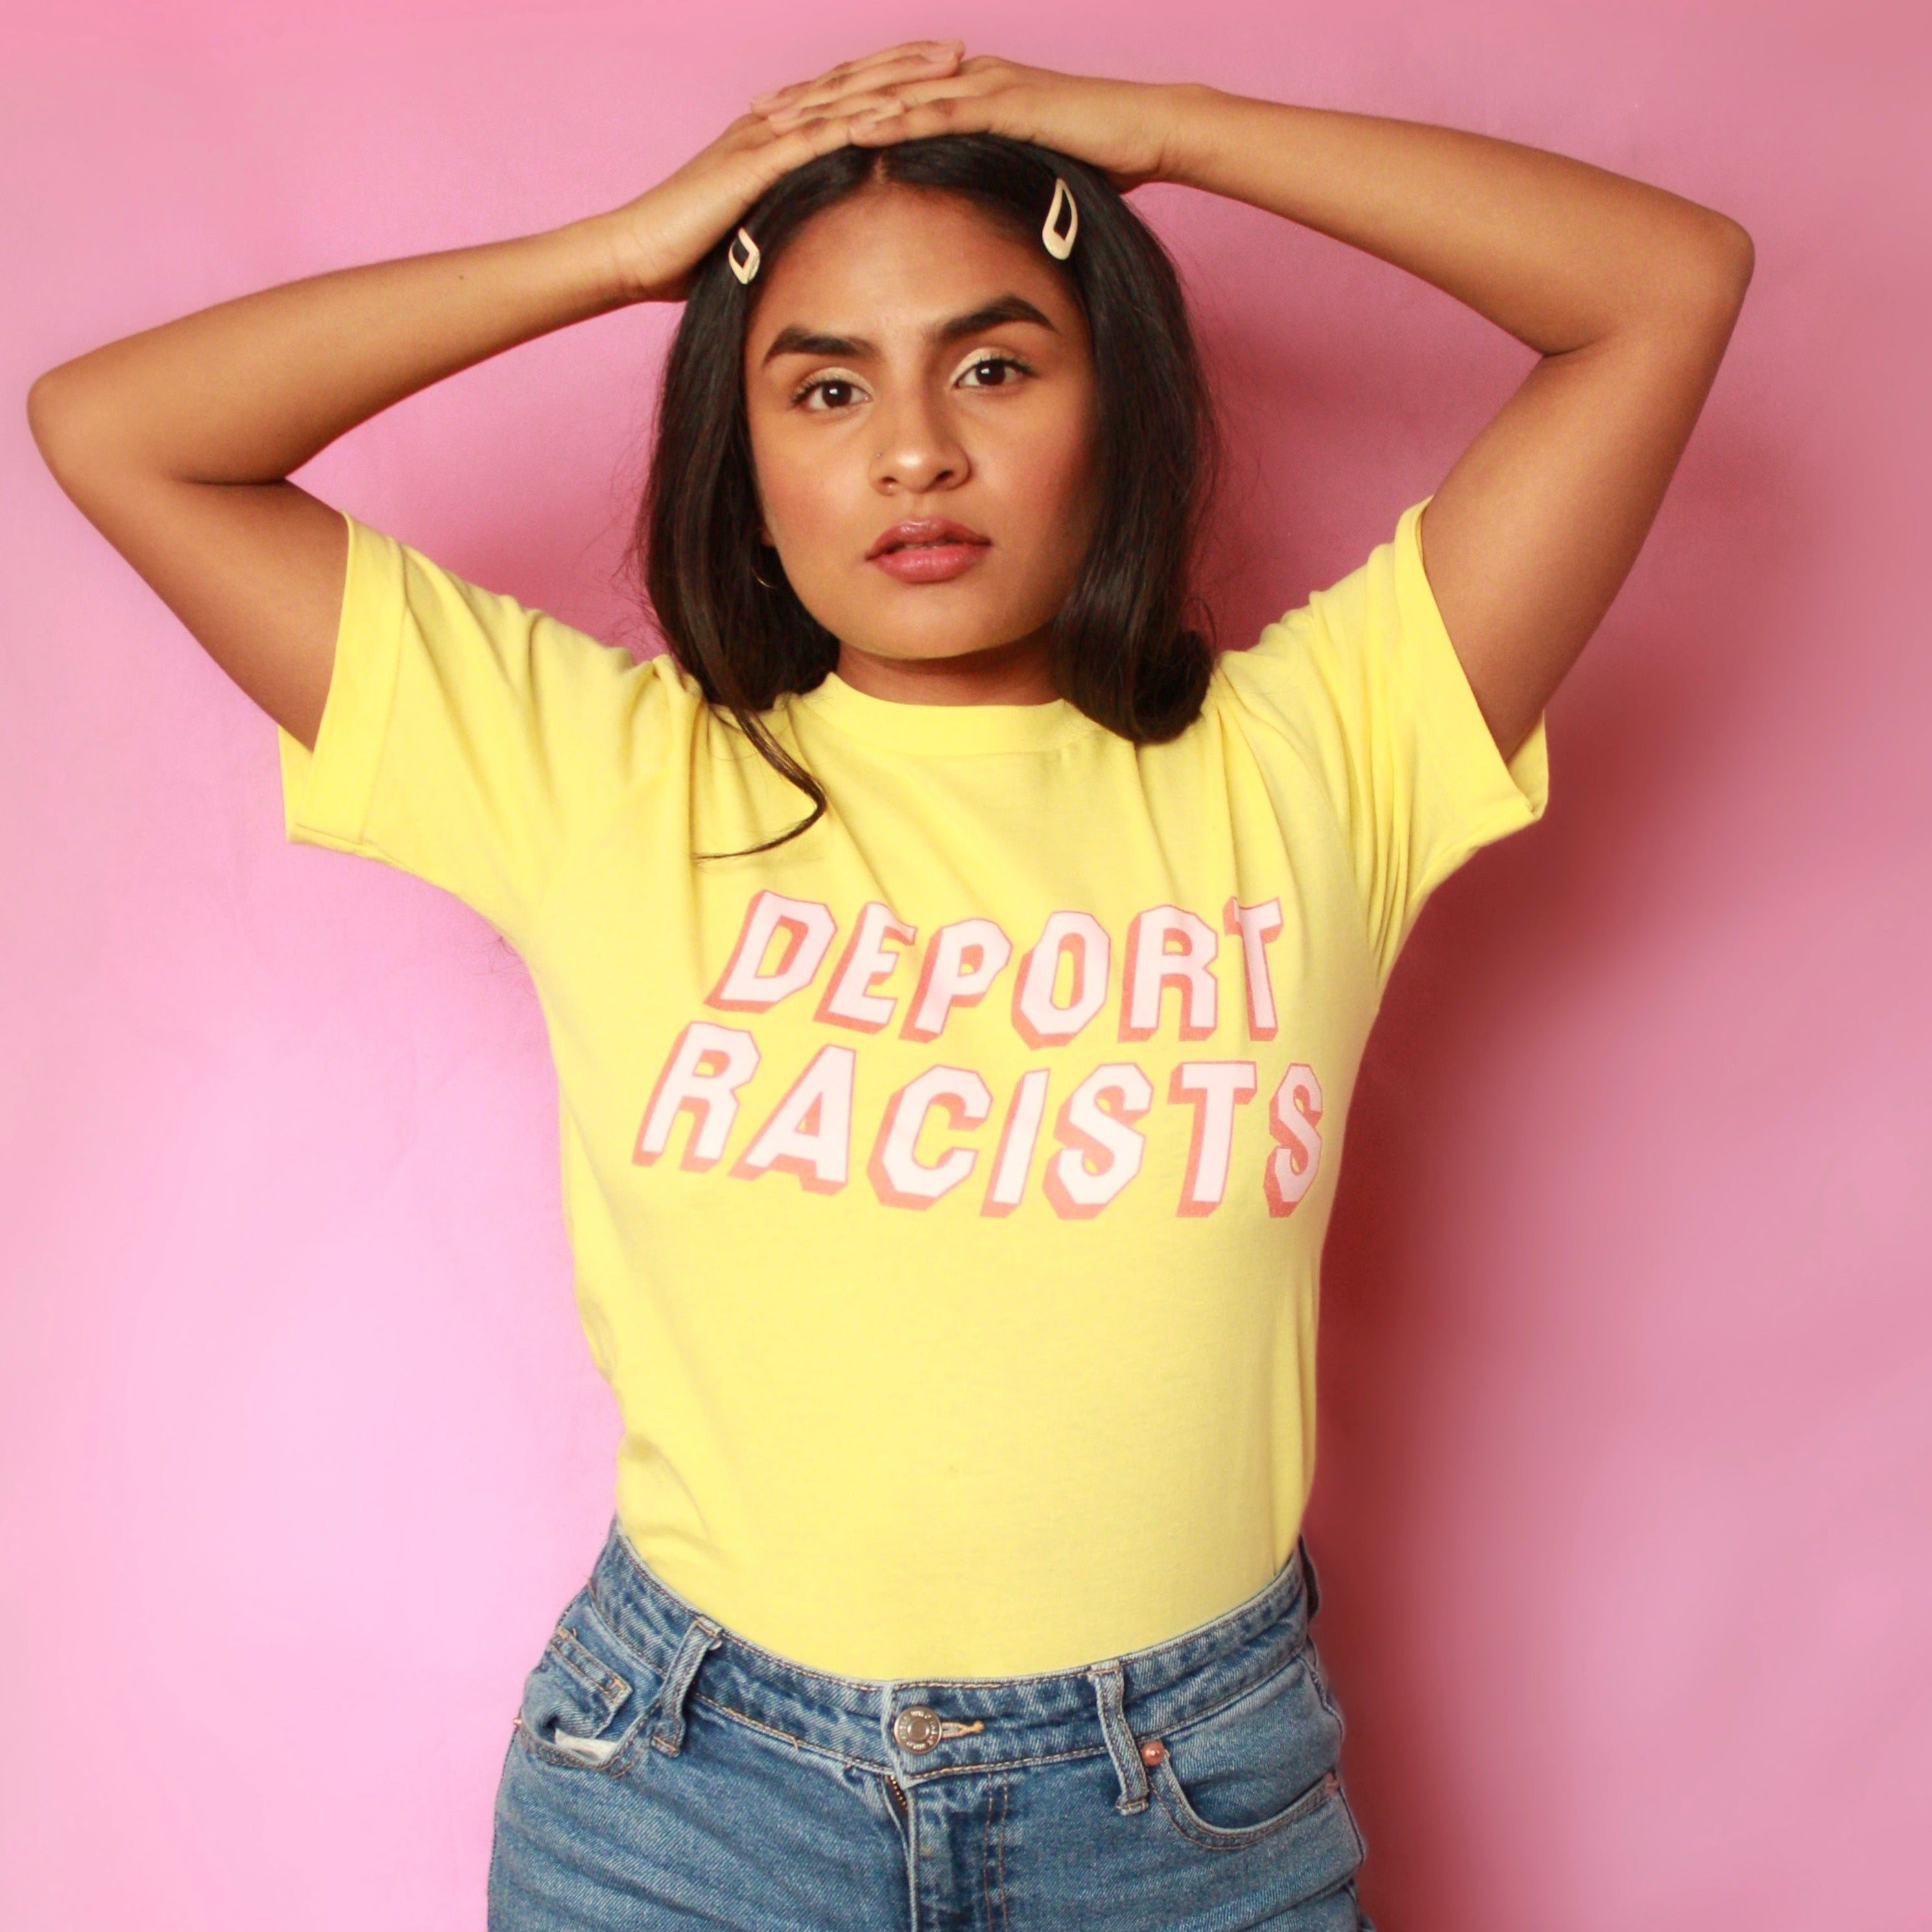 Empowering yellow feminist shirt featuring the message "Deport Racists" in peach writing